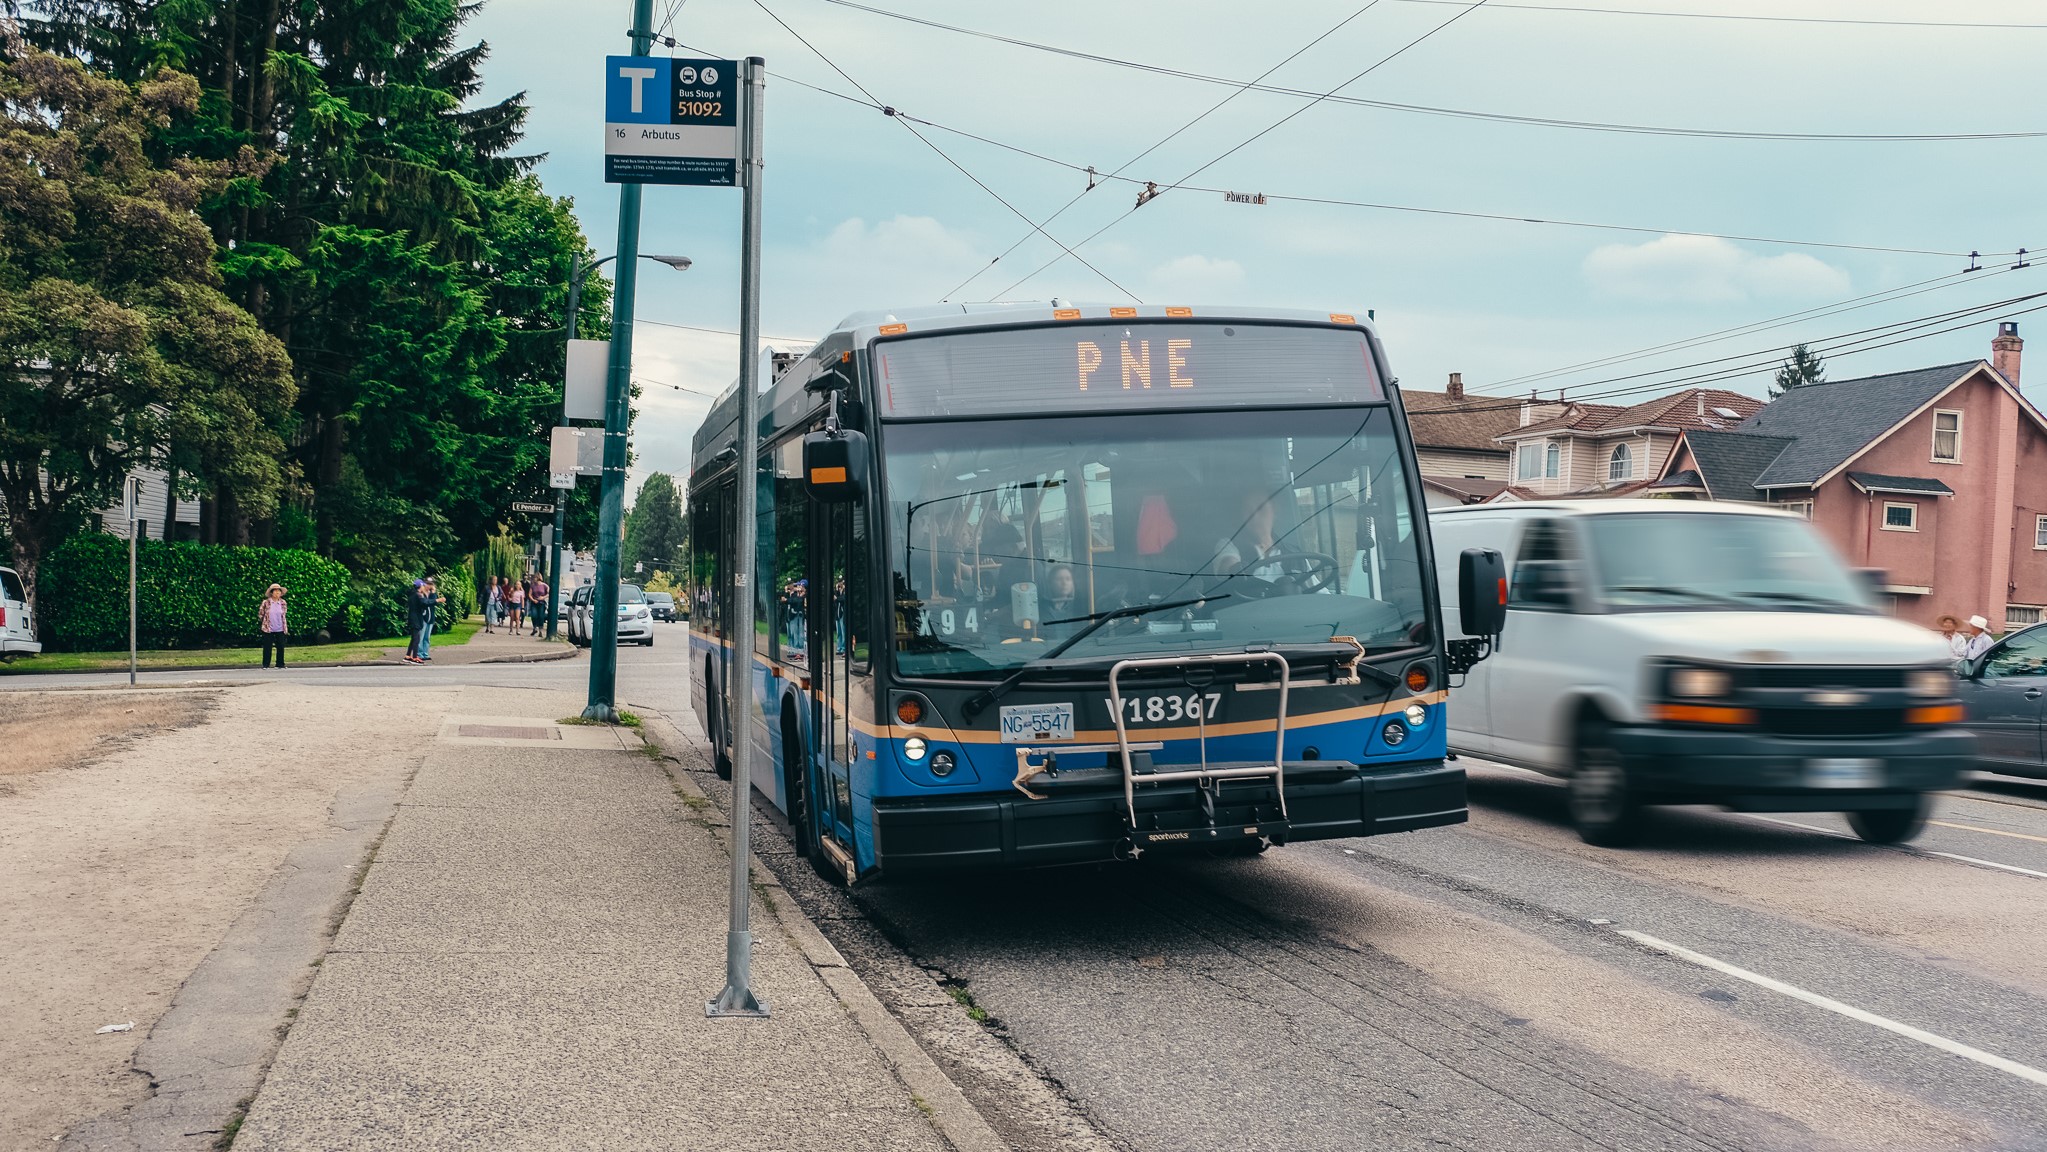 The PNE Special bus arrives at Hastings and Renfrew